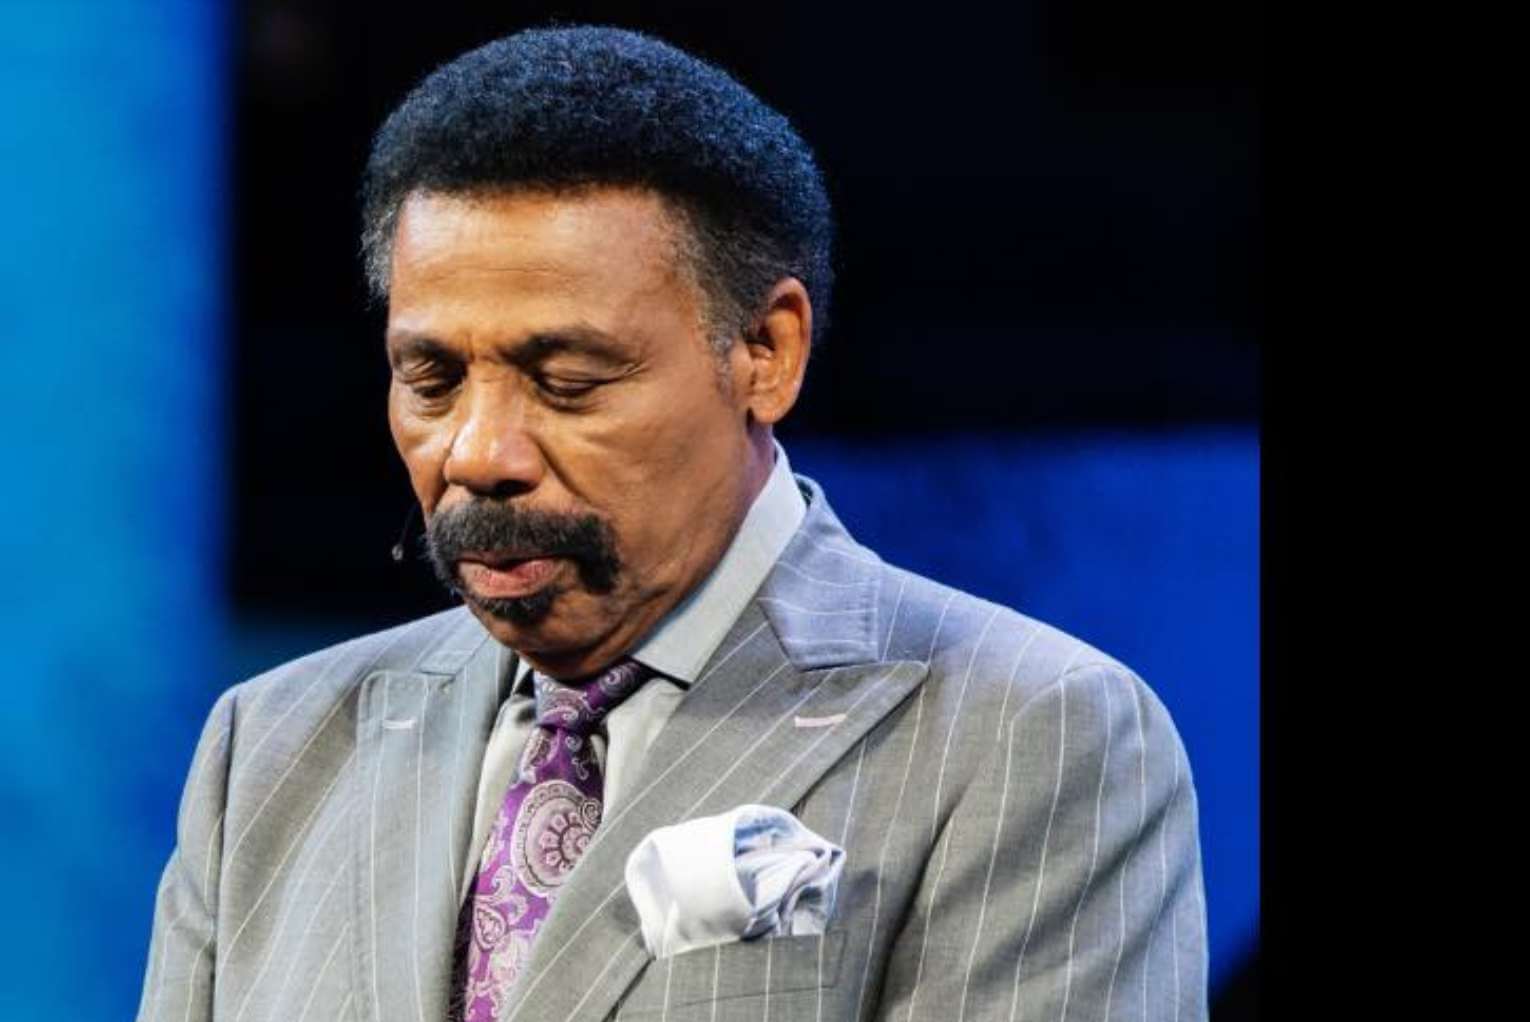 Morning Rundown: Tony Evans’ Son on Controversy: ‘We Already Have Victory’